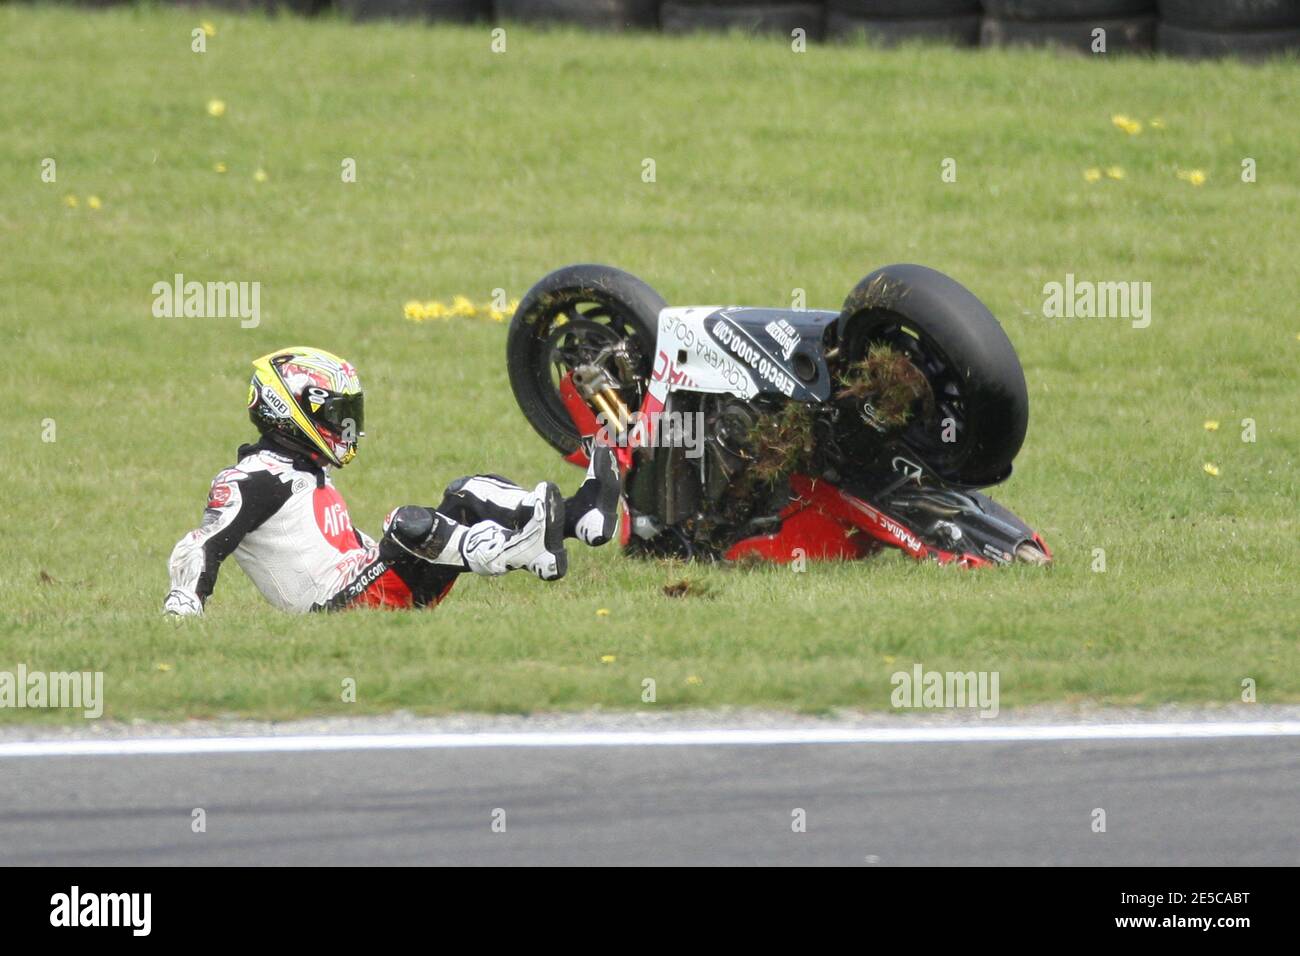 Spain's Toni Elias of Ducati team falls during the qualification of the  Austrlian motorcycling Grand Prix at Philip Island circuit in Philip  Island, south of Australia, on October 4, 2008. Photo by